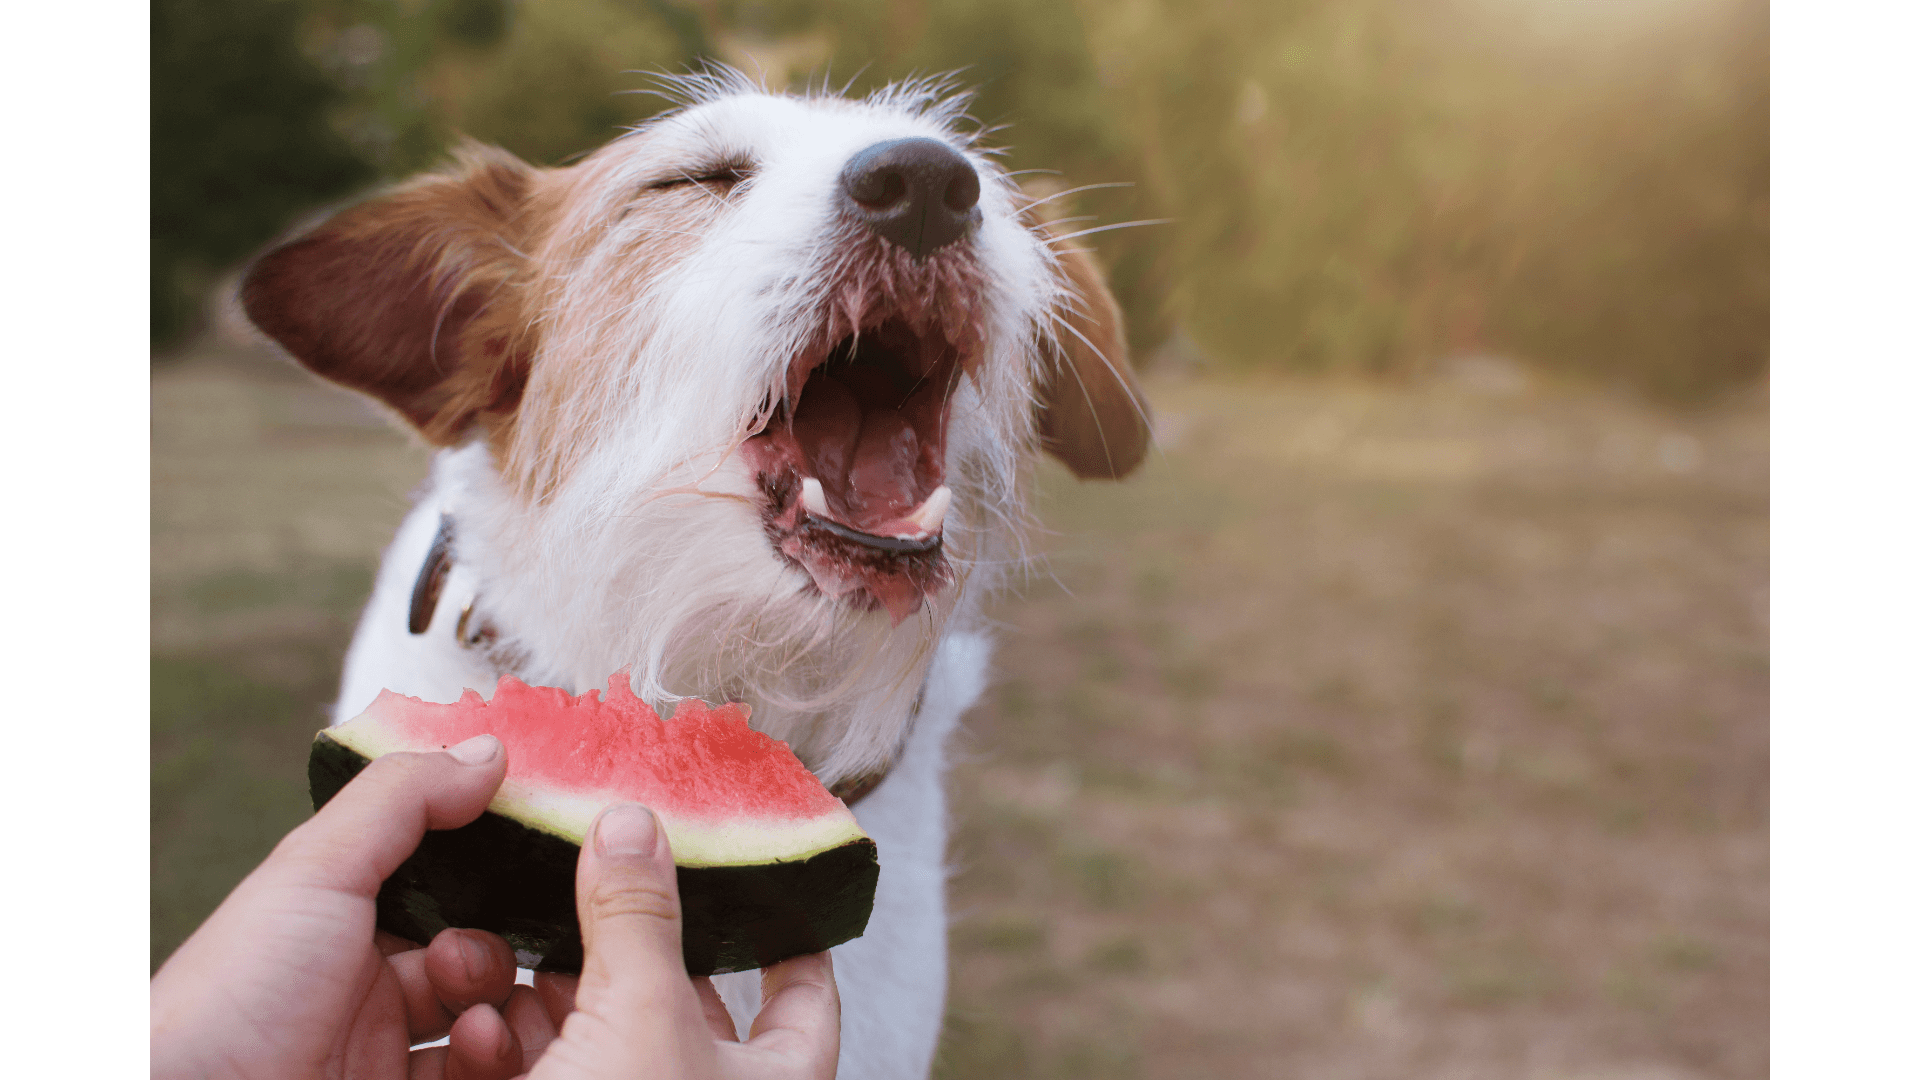 Safety Considerations When Feeding Watermelon to Dogs